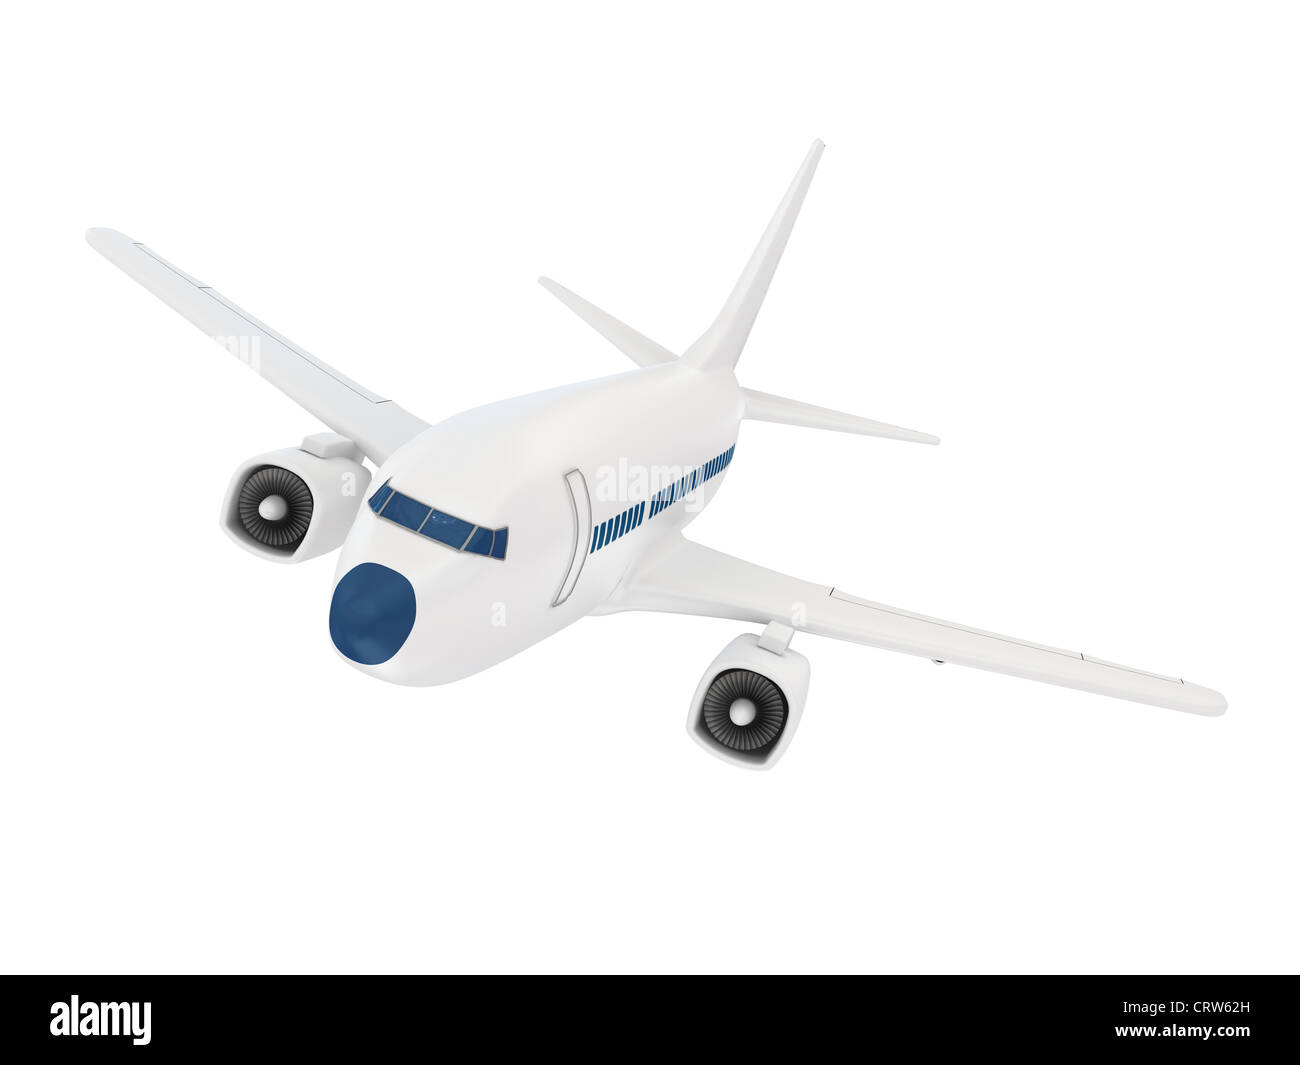 Airplane over white background. 3d rendered image Stock Photo